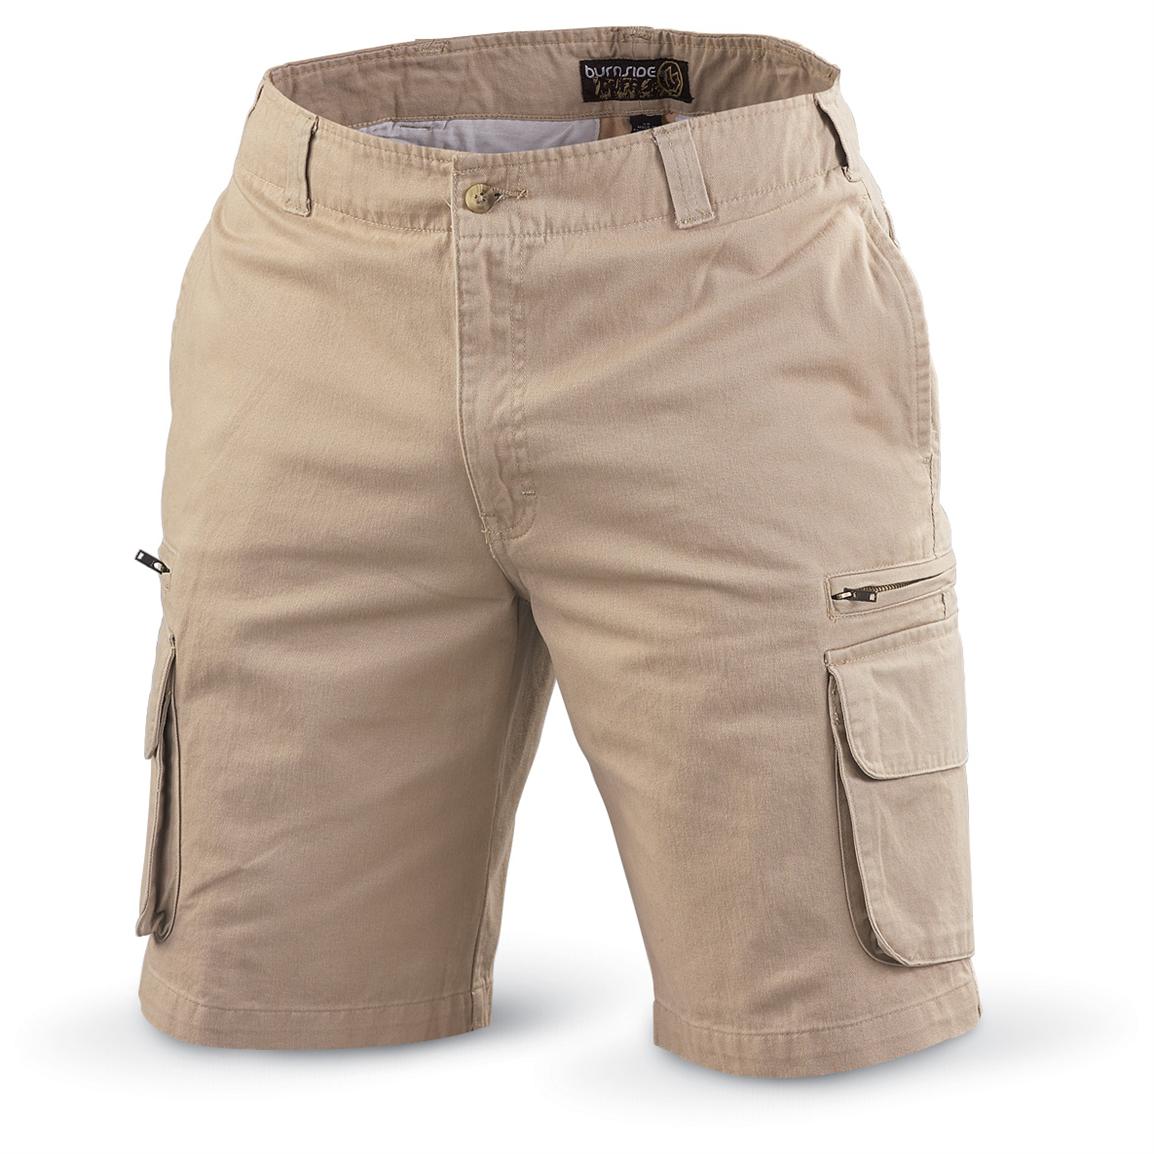 2 Burnside® Twill Cargo Shorts - 119461, Shorts at Sportsman's Guide